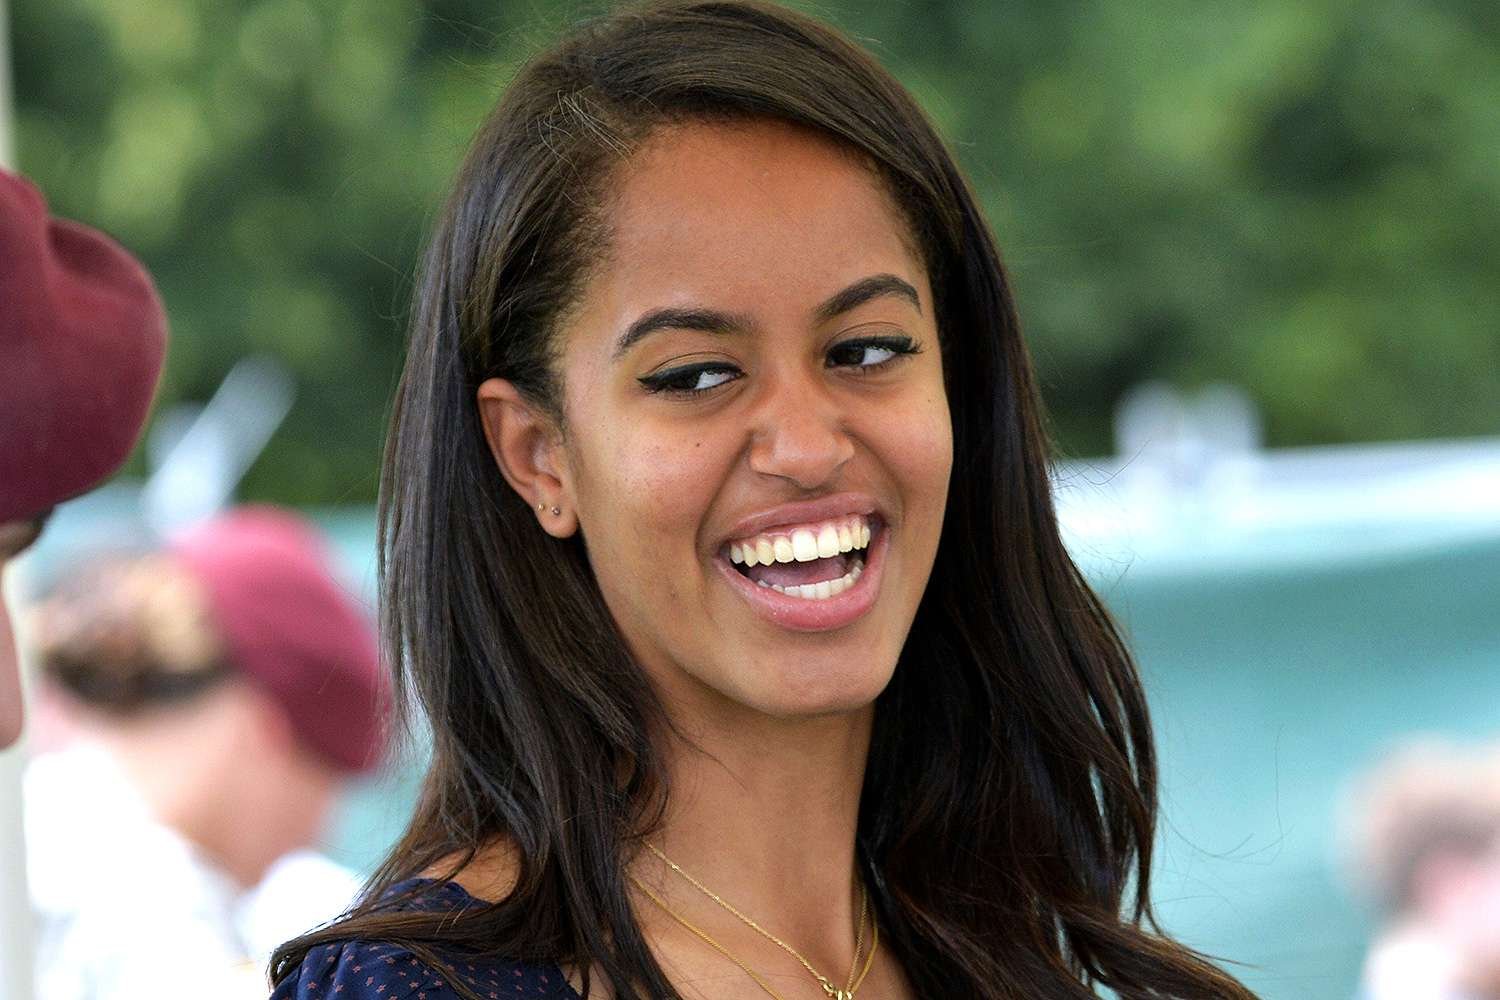 'Swarm' Showrunner Says the Episode Malia Obama Wrote Is 'One of the Wildest': 'It's Going to Surprise People'